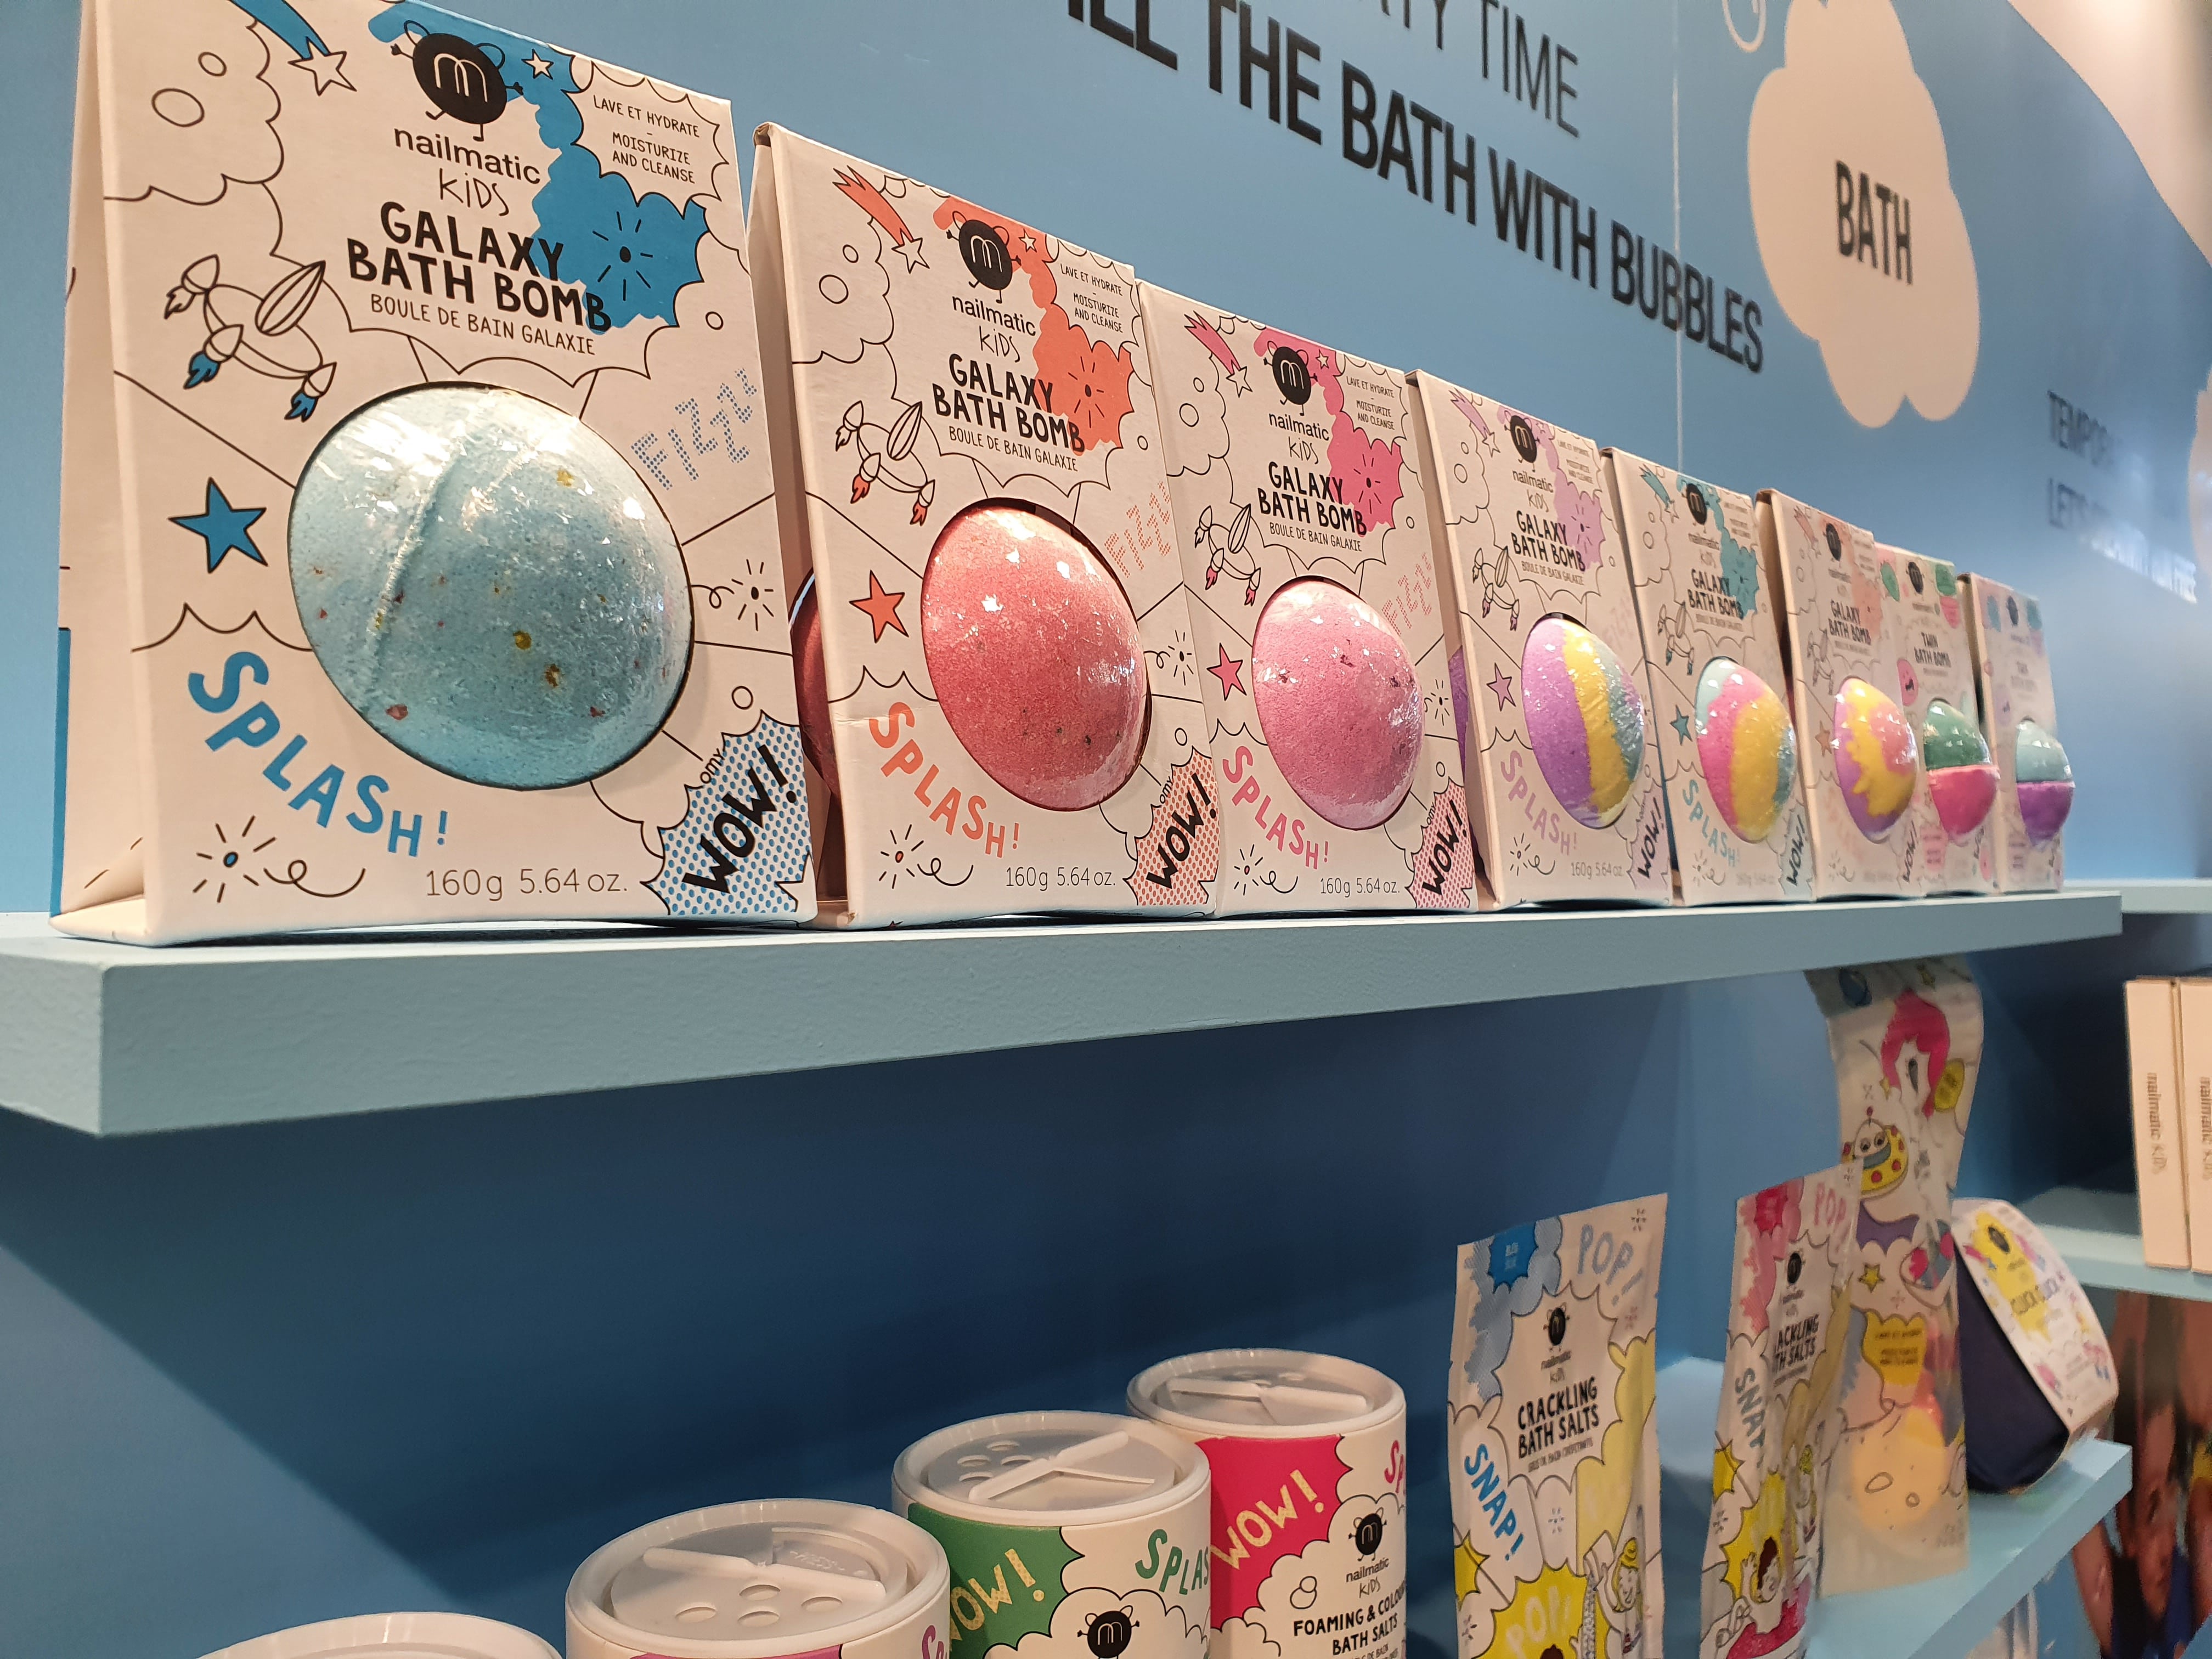 Nailmatic's bath line offered a range of coloured and foaming bath bombs and salts